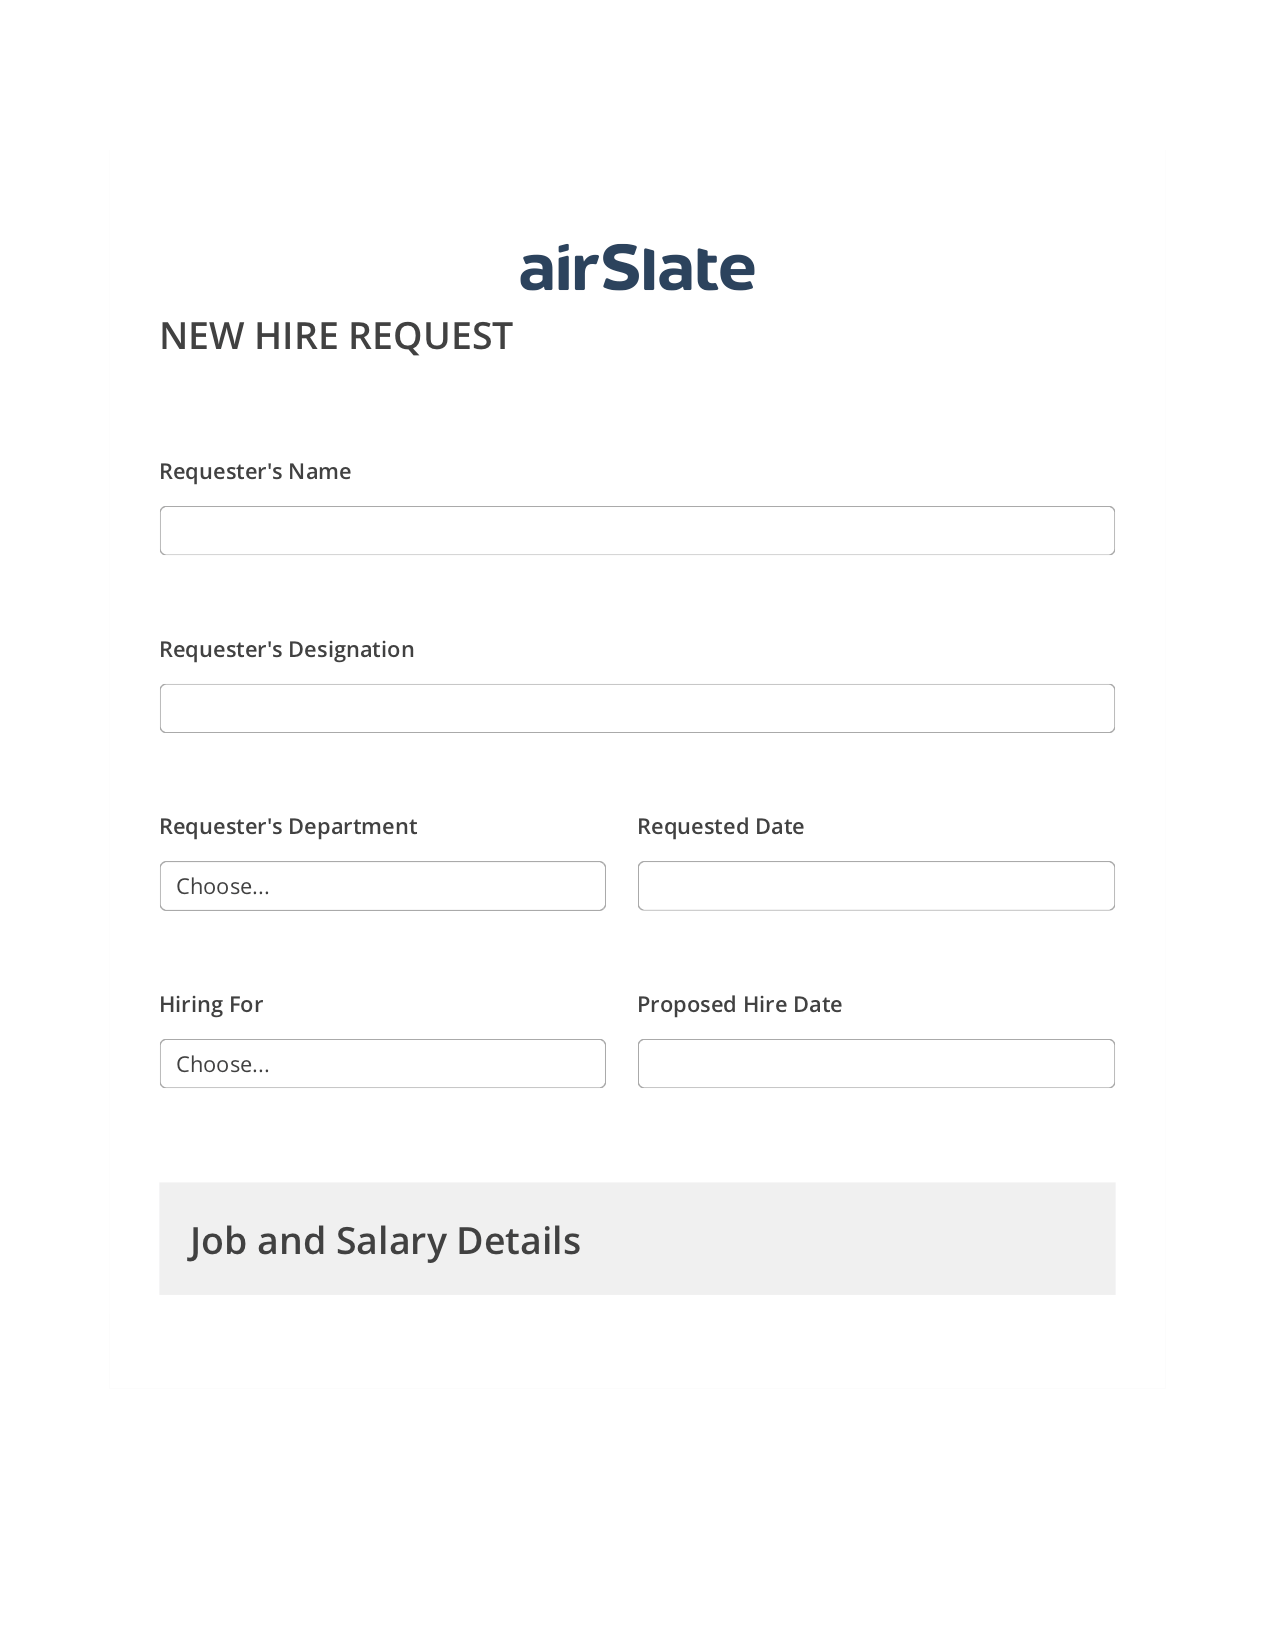 Multirole Hiring Request Workflow Pre-fill Dropdowns from CSV file Bot, Create NetSuite Record bot, Export to Salesforce Record Bot